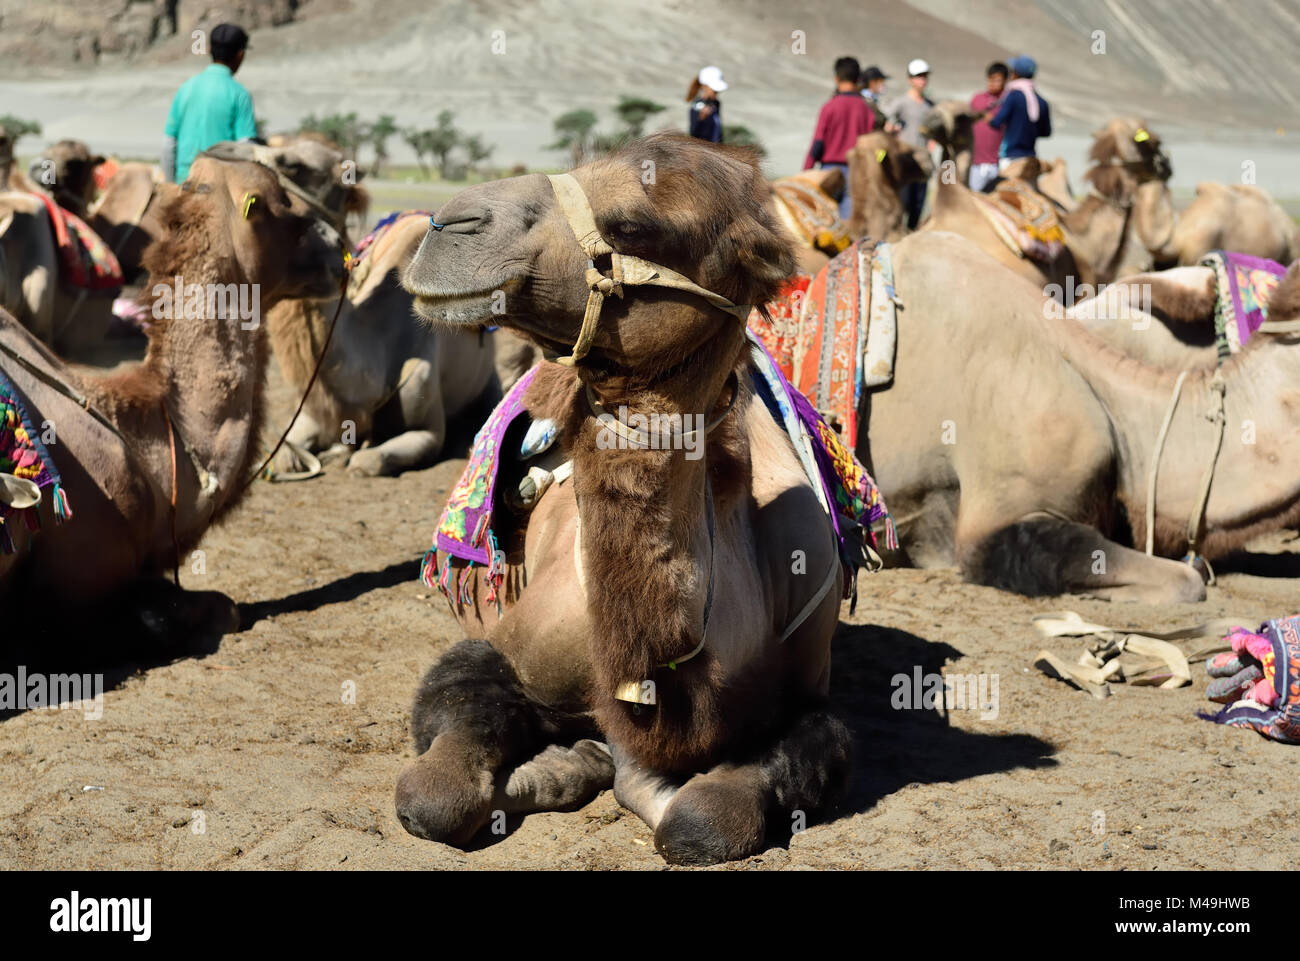 Camels on the desert in the Nubra valley in Ladakh, India. Stock Photo